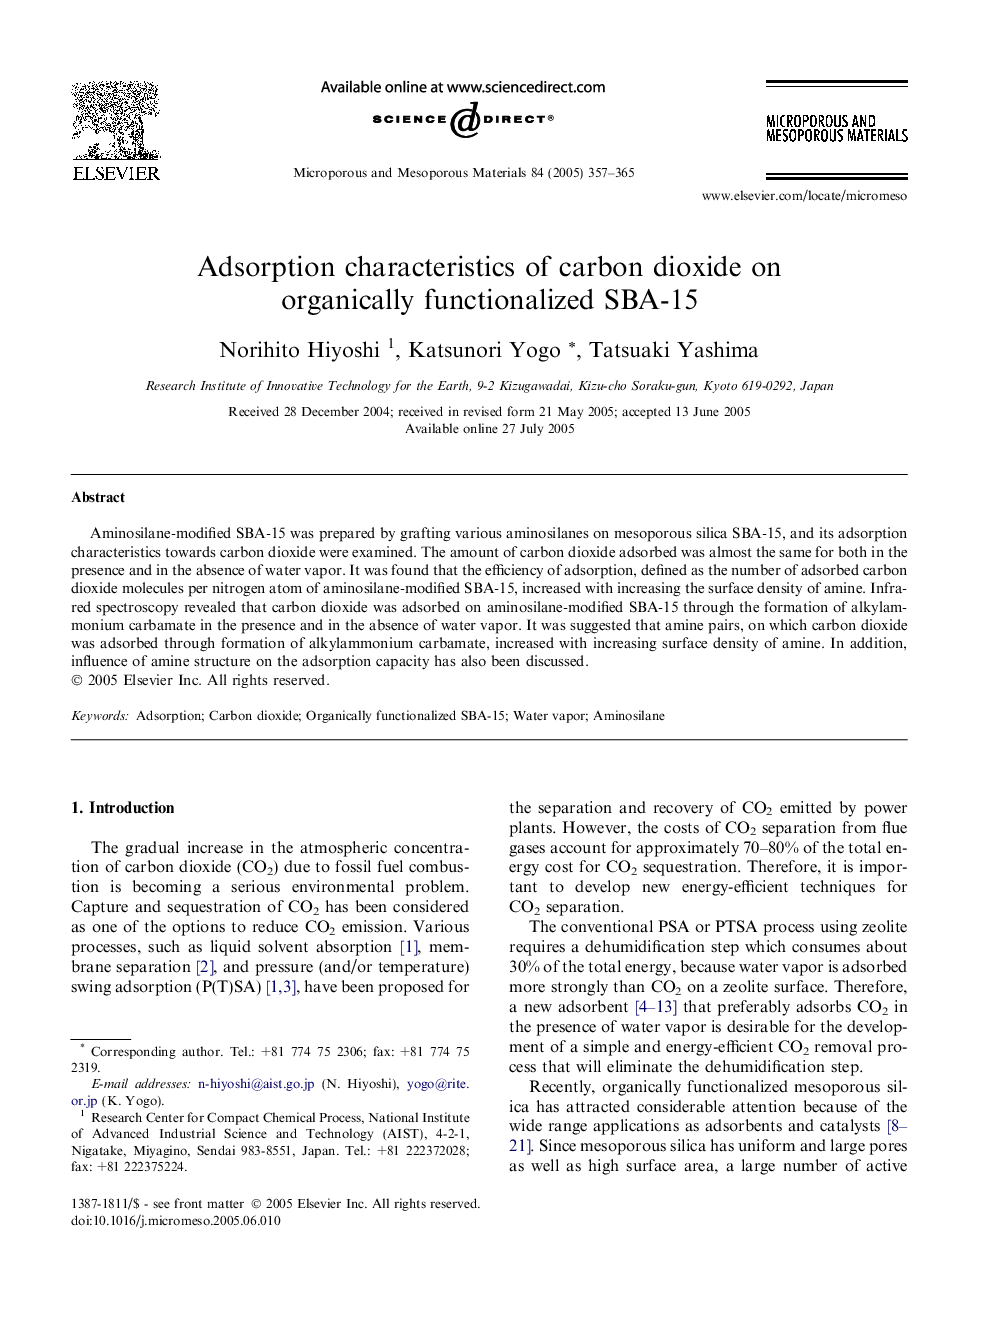 Adsorption characteristics of carbon dioxide on organically functionalized SBA-15